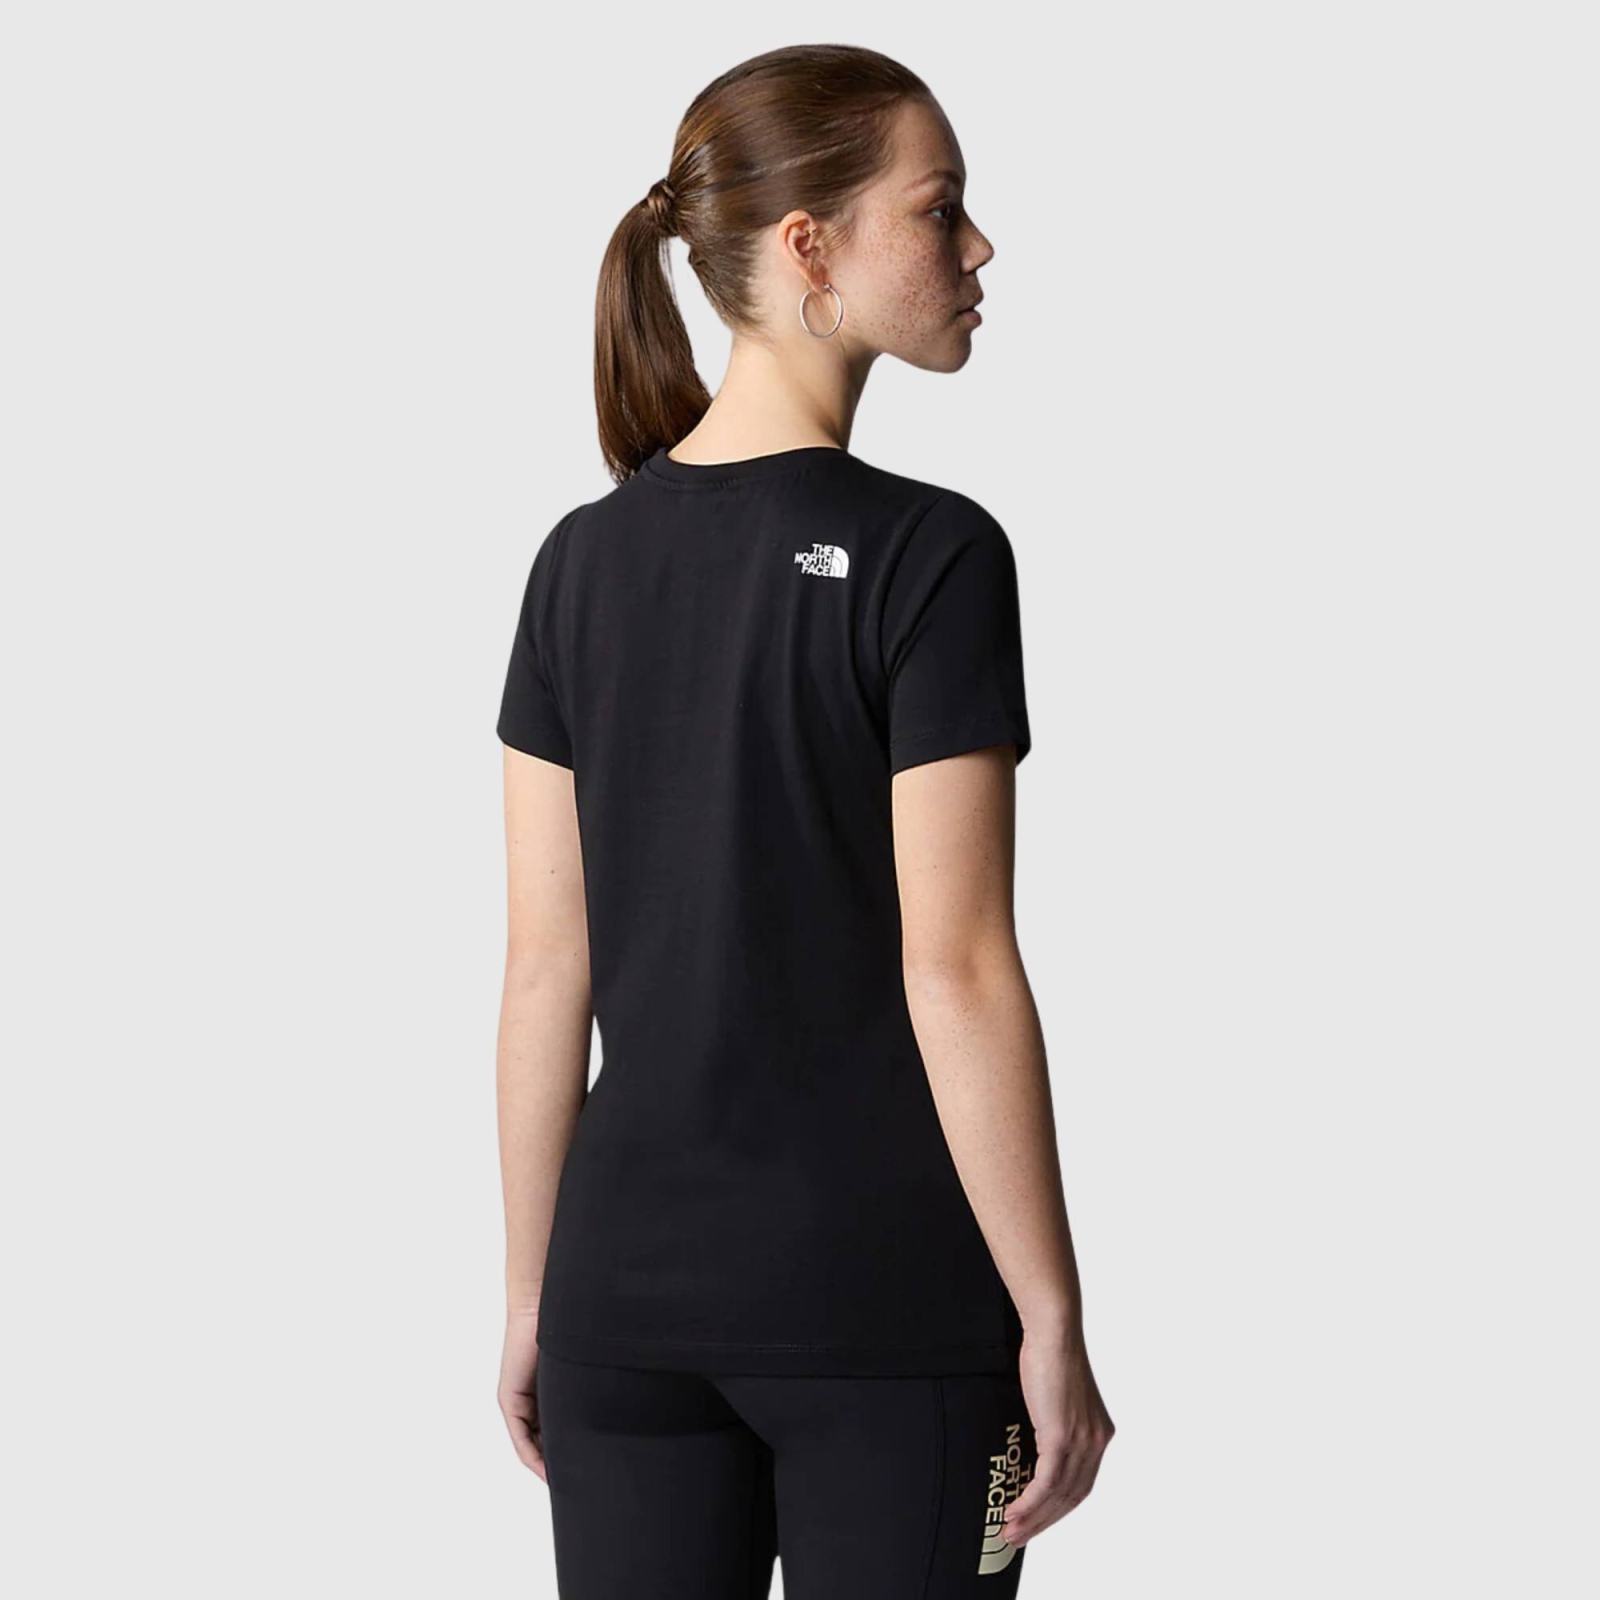 THE NORTH FACE WOMENS EASY TEE